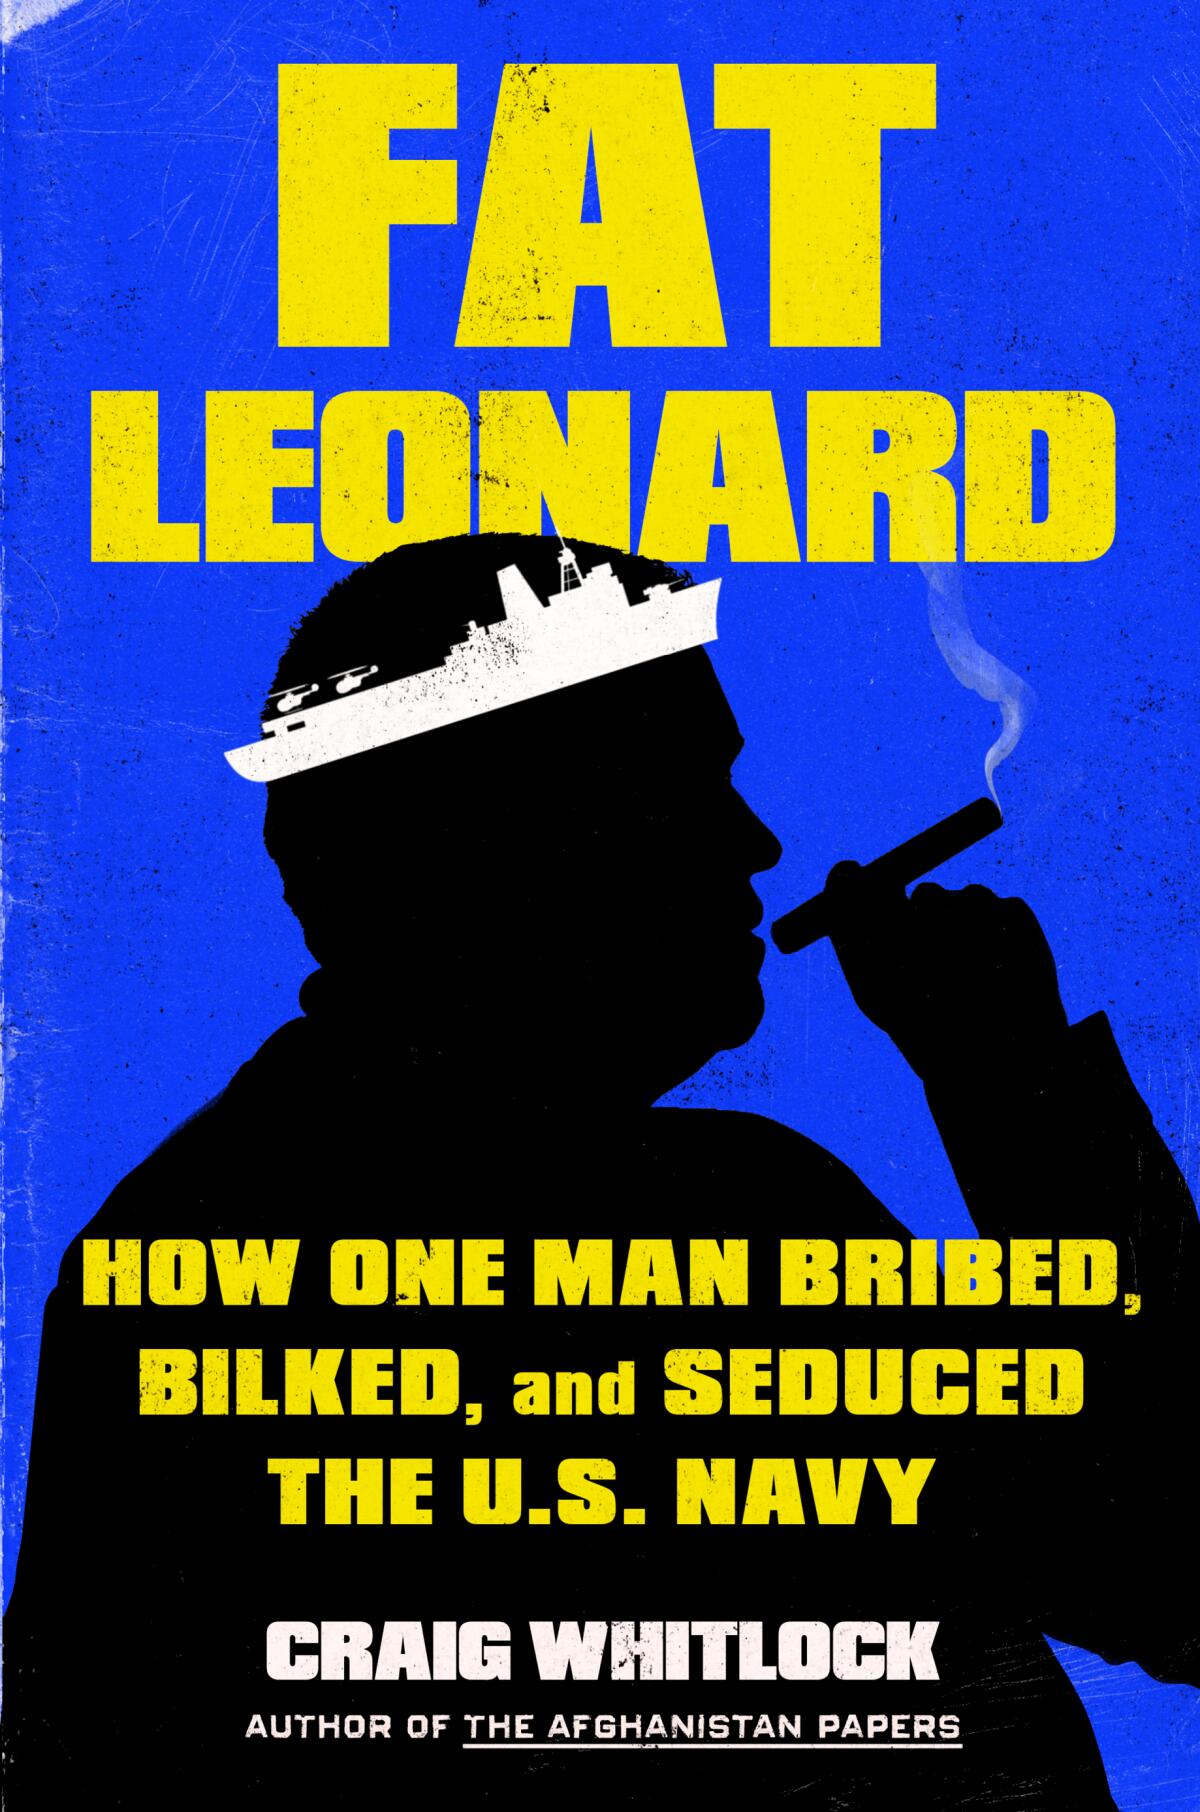 A new book published this month goes in-depth on the Fat Leonard scandal.